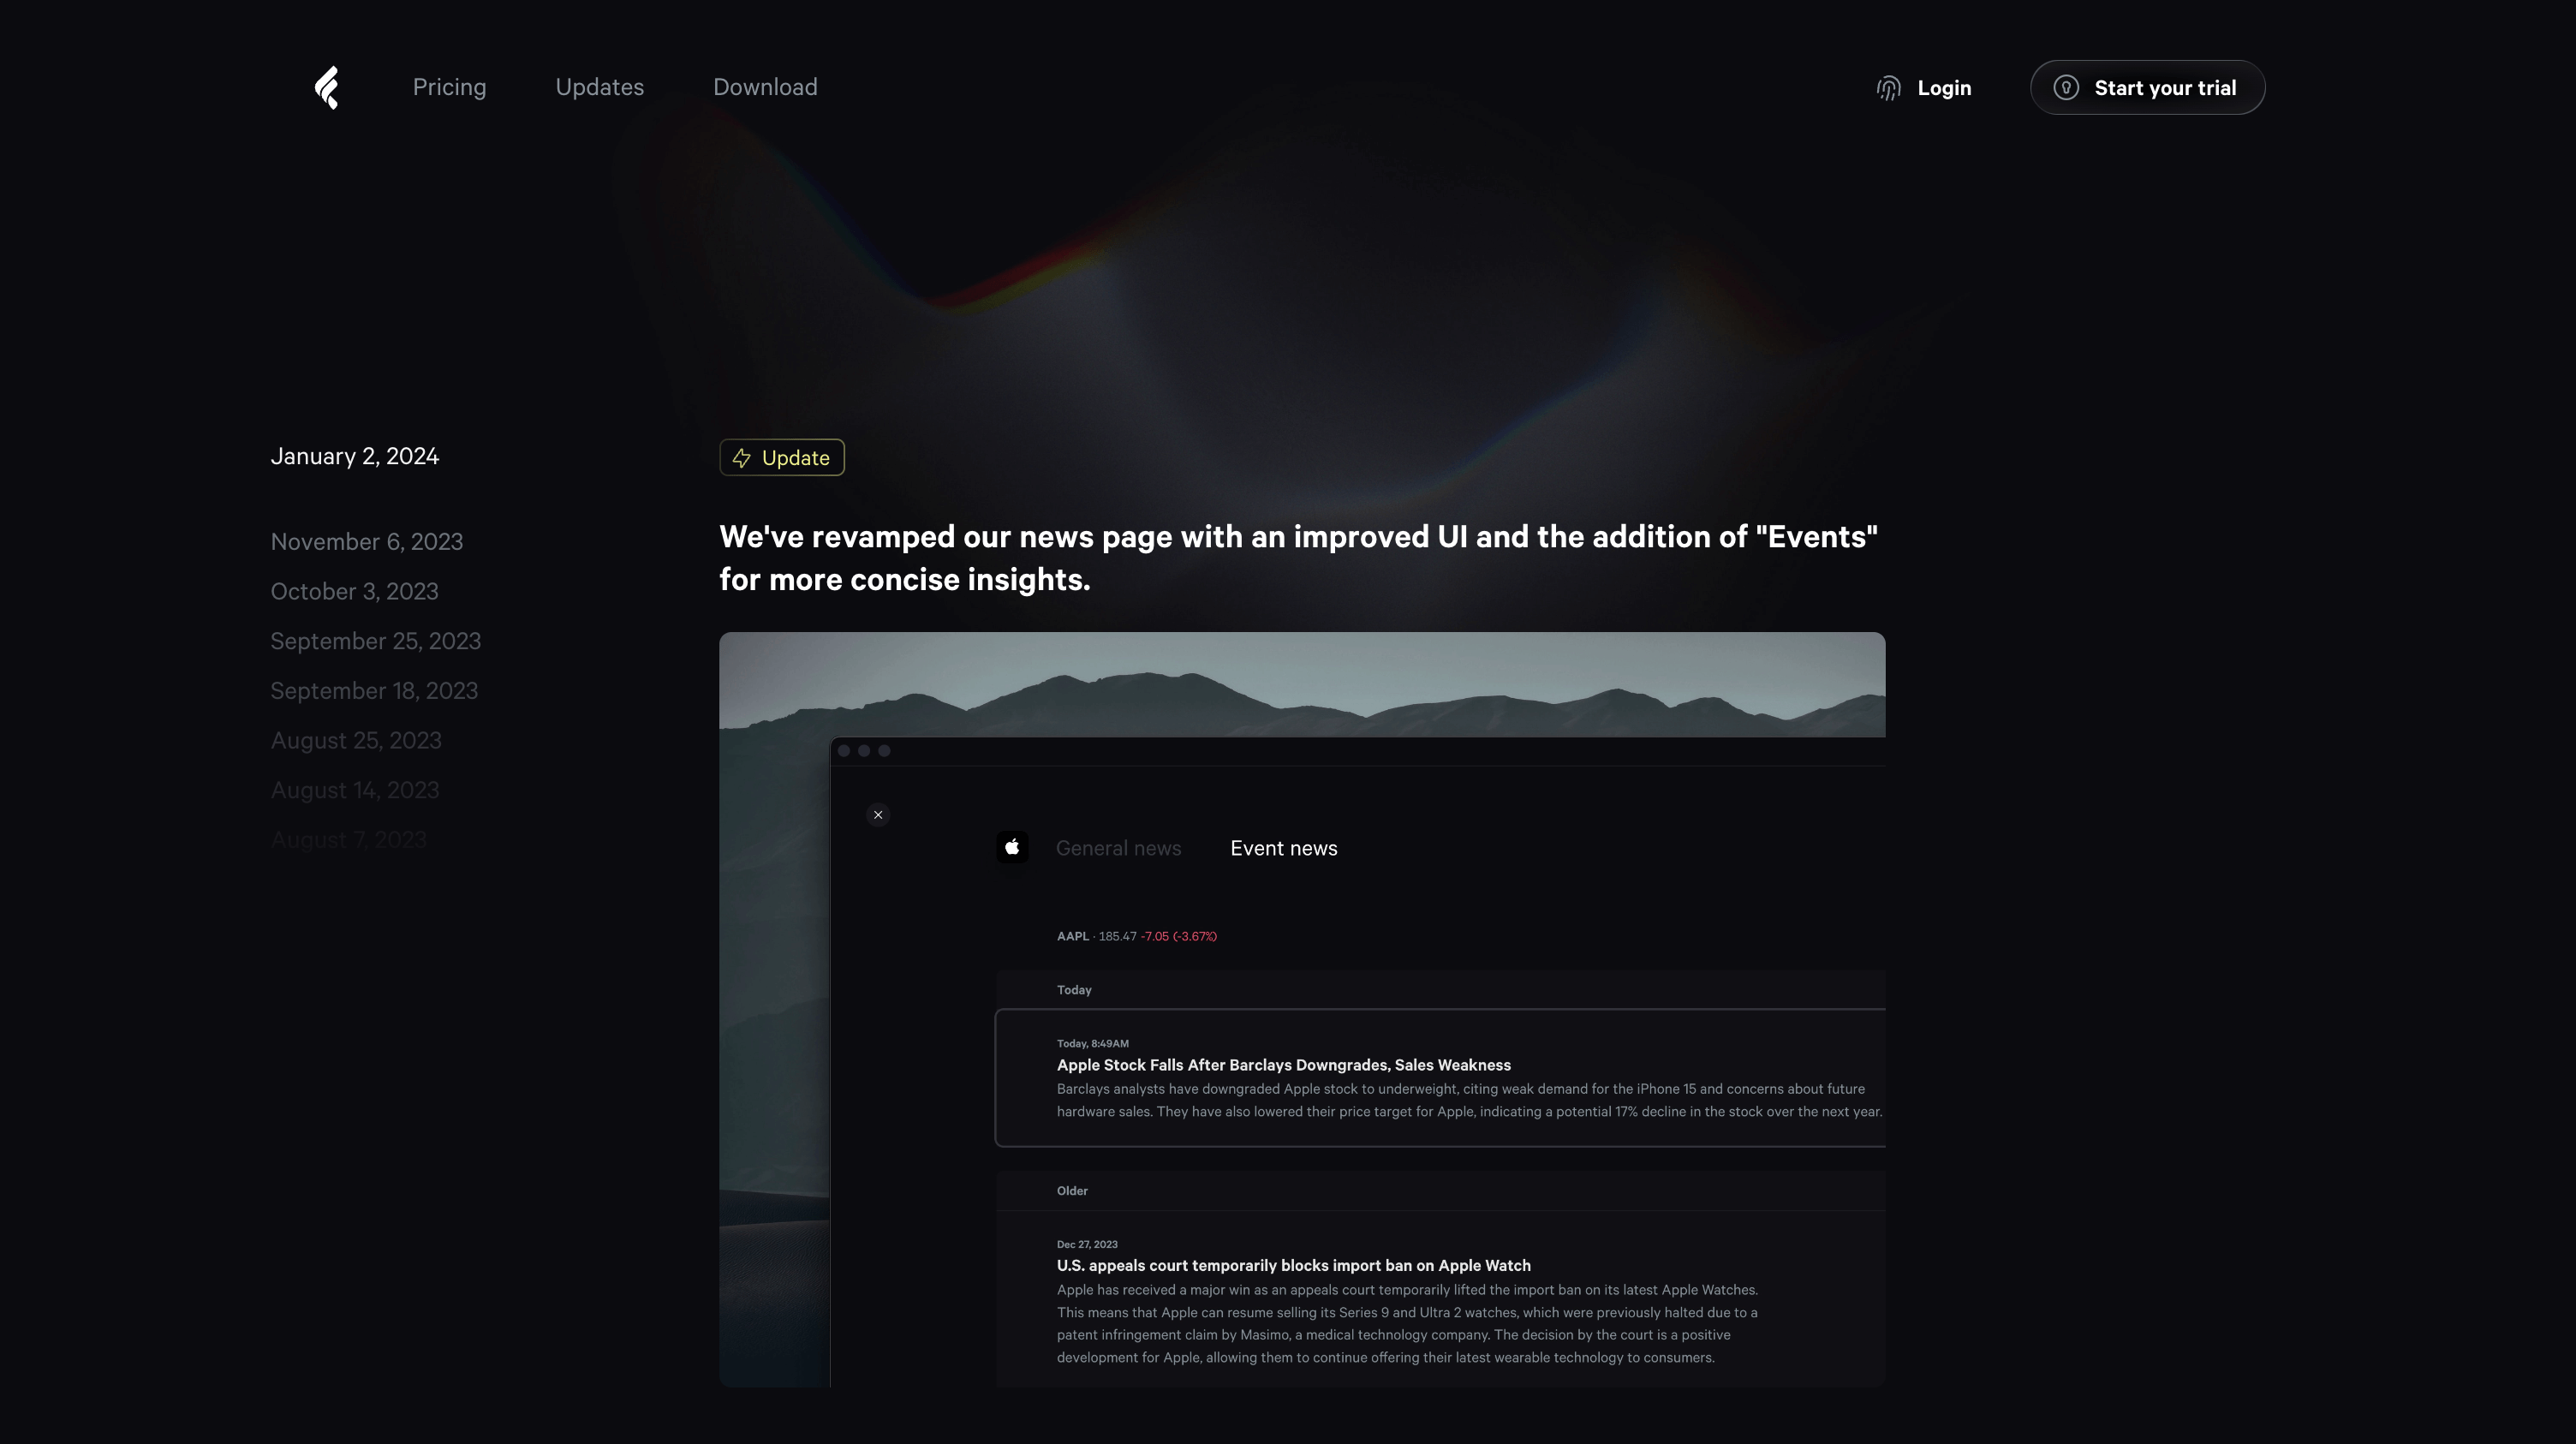 A website's update page with a dark theme. The page includes navigation tabs like Pricing, Updates, and Download at the top, dates listed on the left side for historical updates, and a news feed on the right displaying general and event news with a sample news item about Apple stock. 